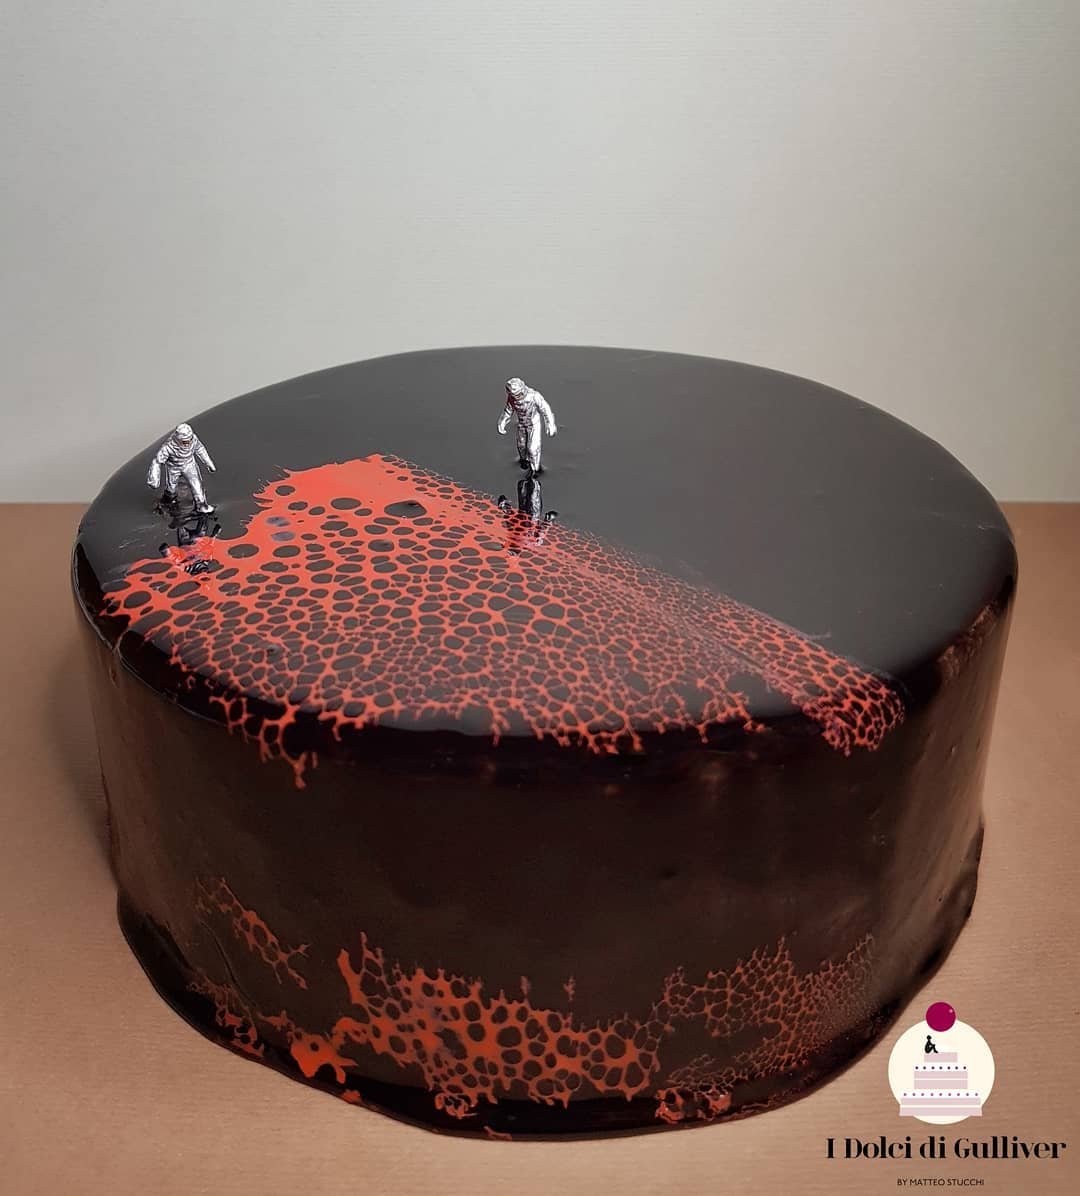 Awesome Cakes, part 3